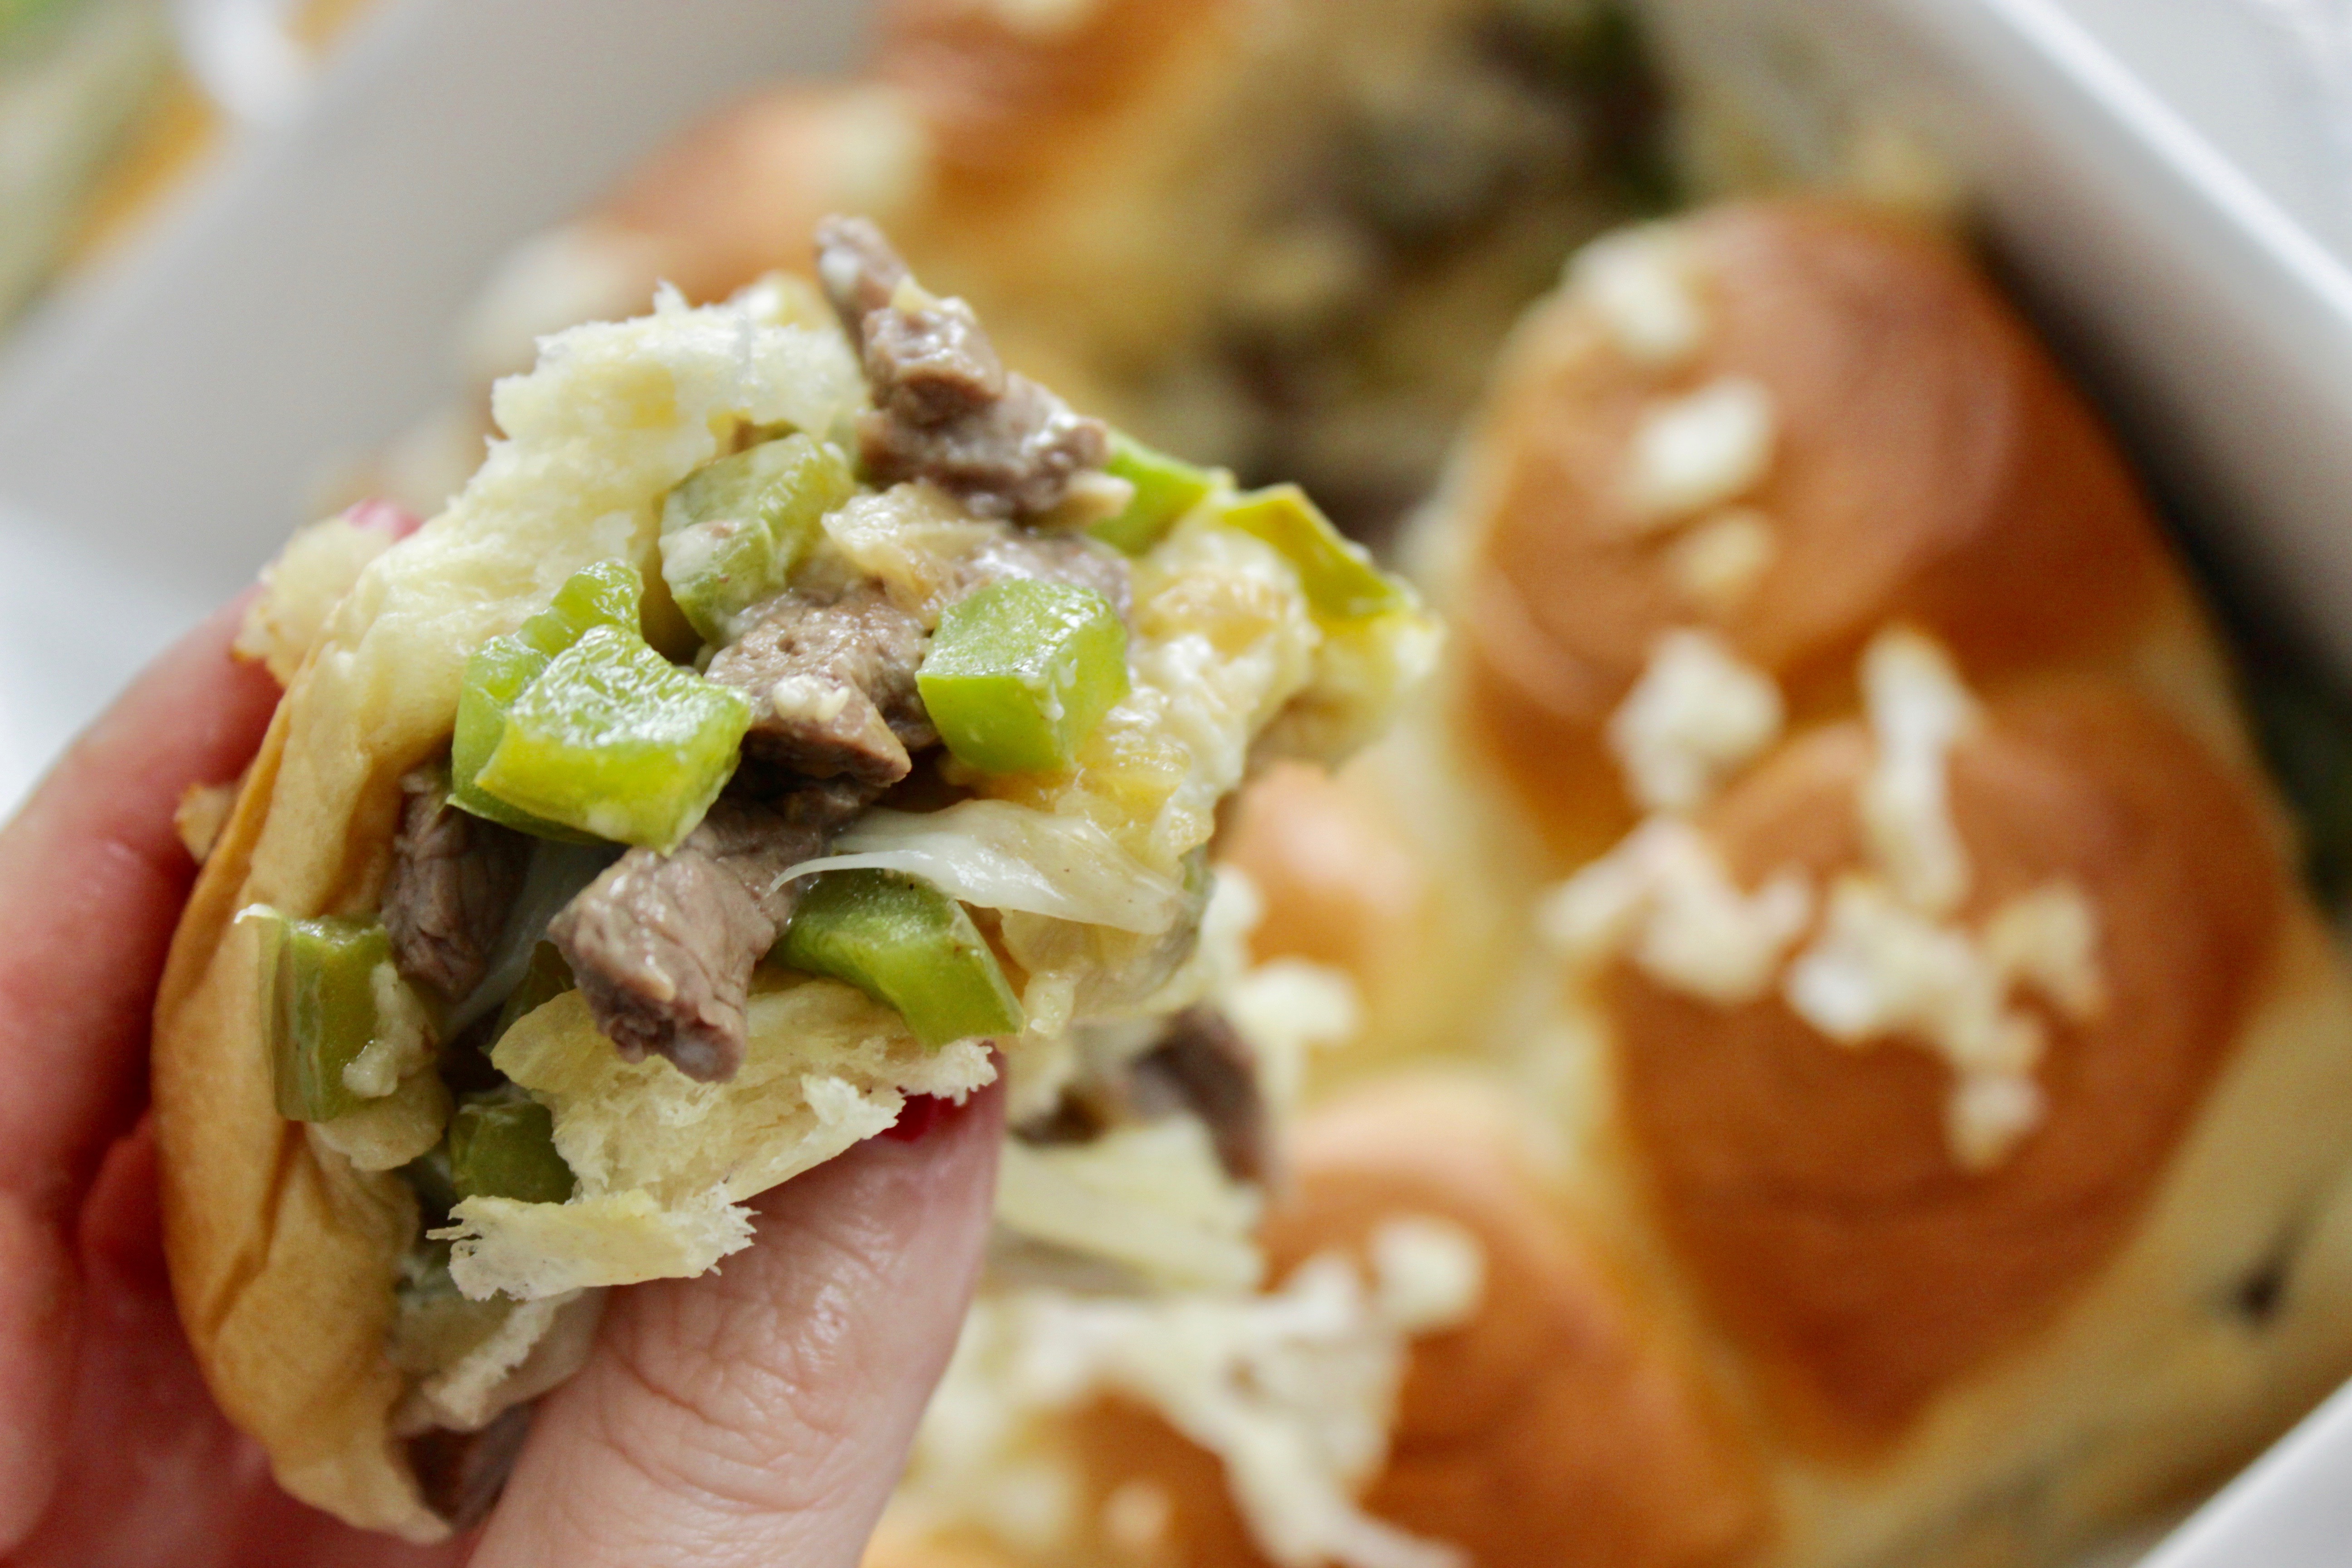 Philly Cheesesteak Sliders hot from the oven